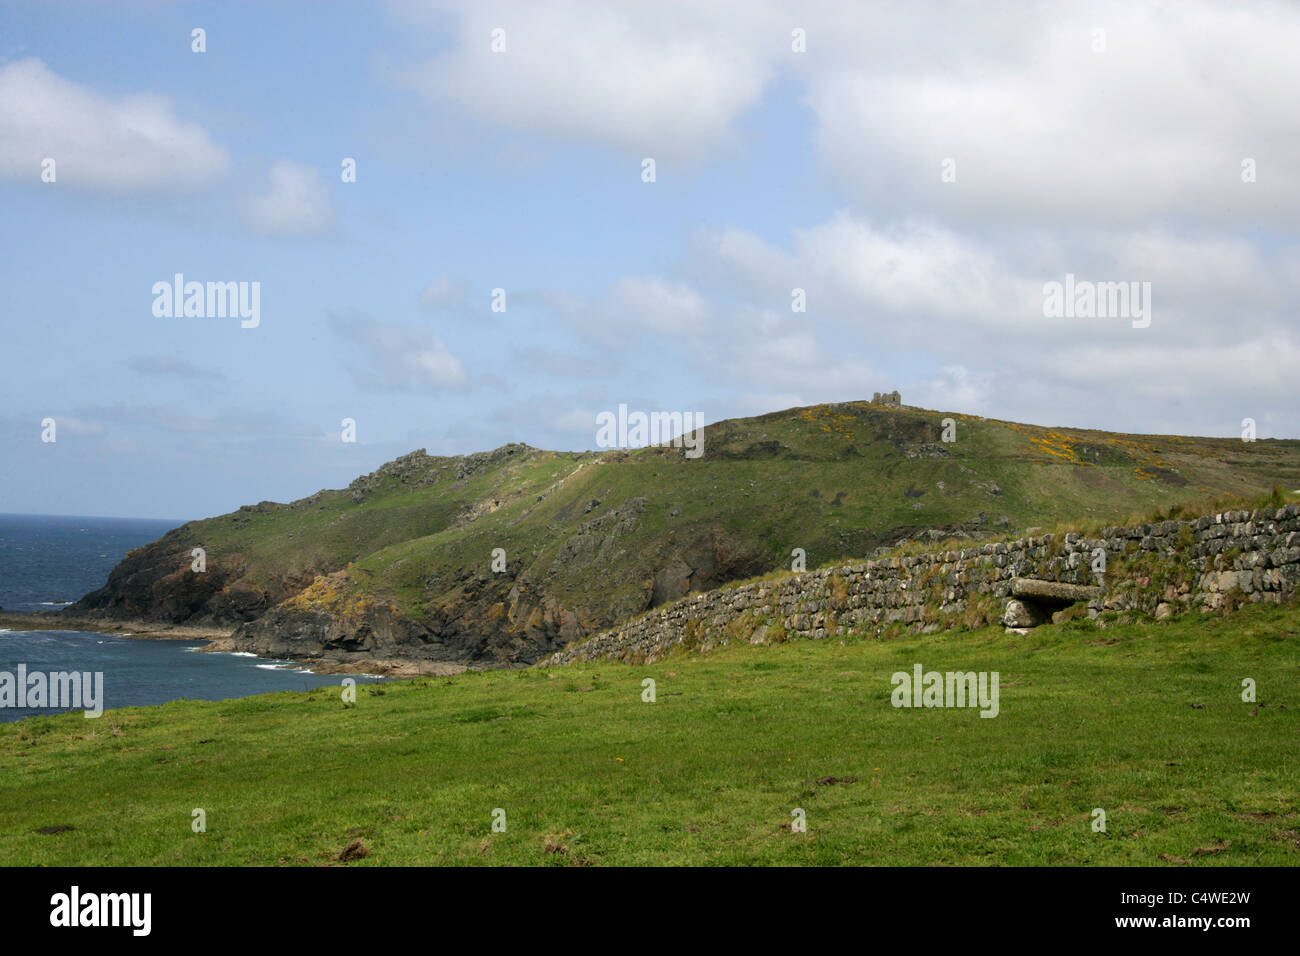 A View from Cape Cornwall, Cornwall, UK Stock Photo